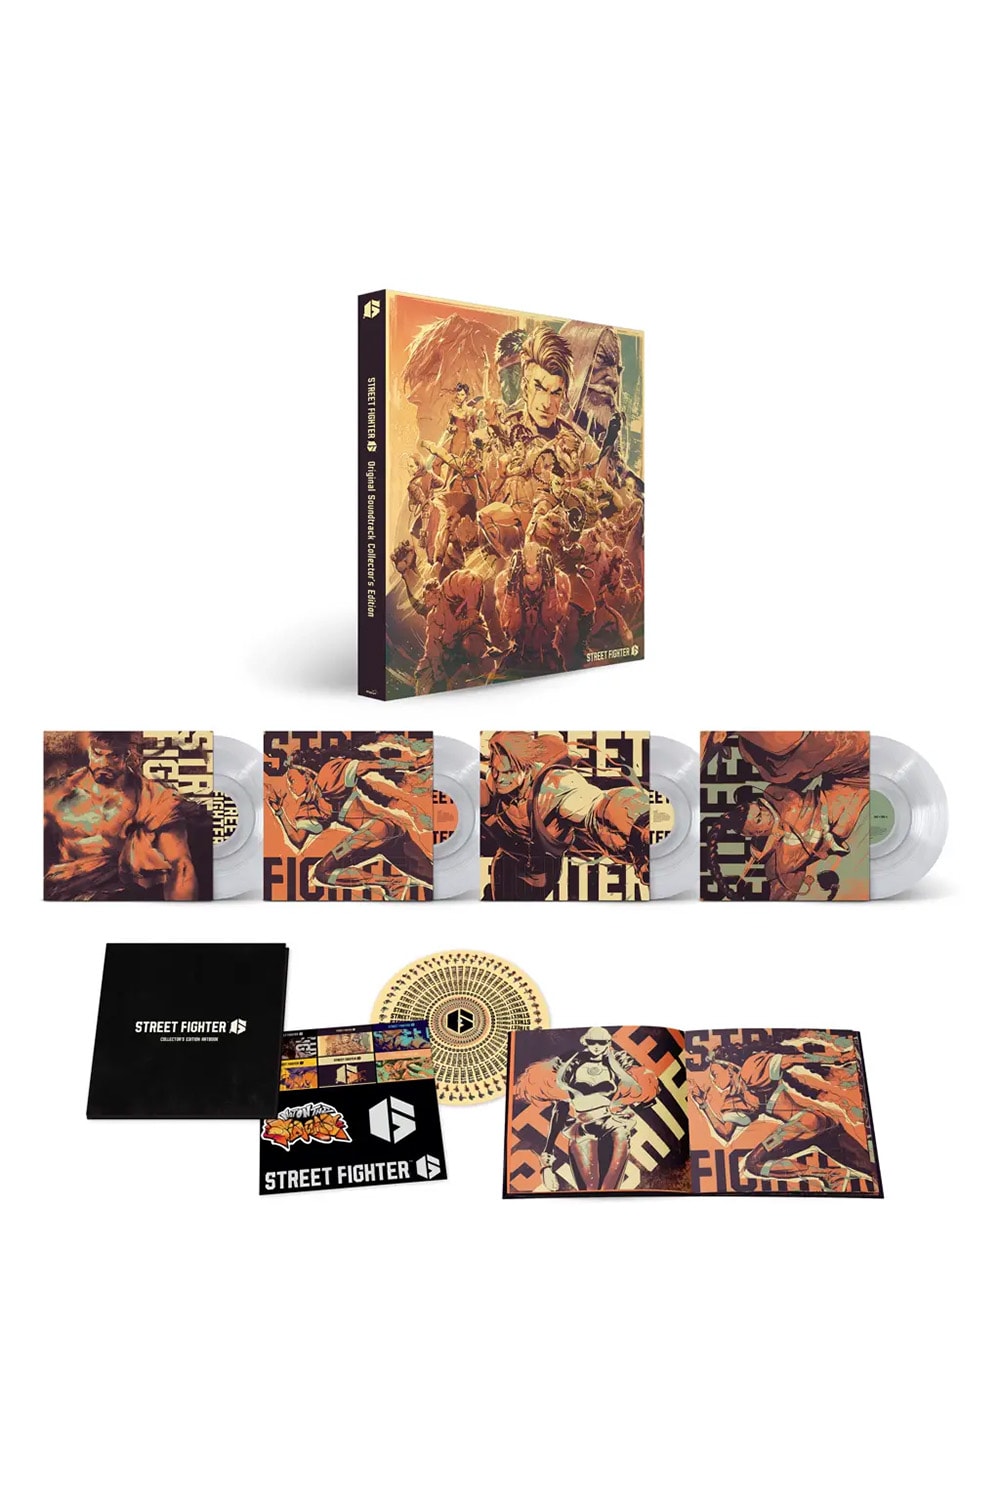 Street Fighter 6 Releases an Exclusive Collector’s Edition Vinyl Box Set